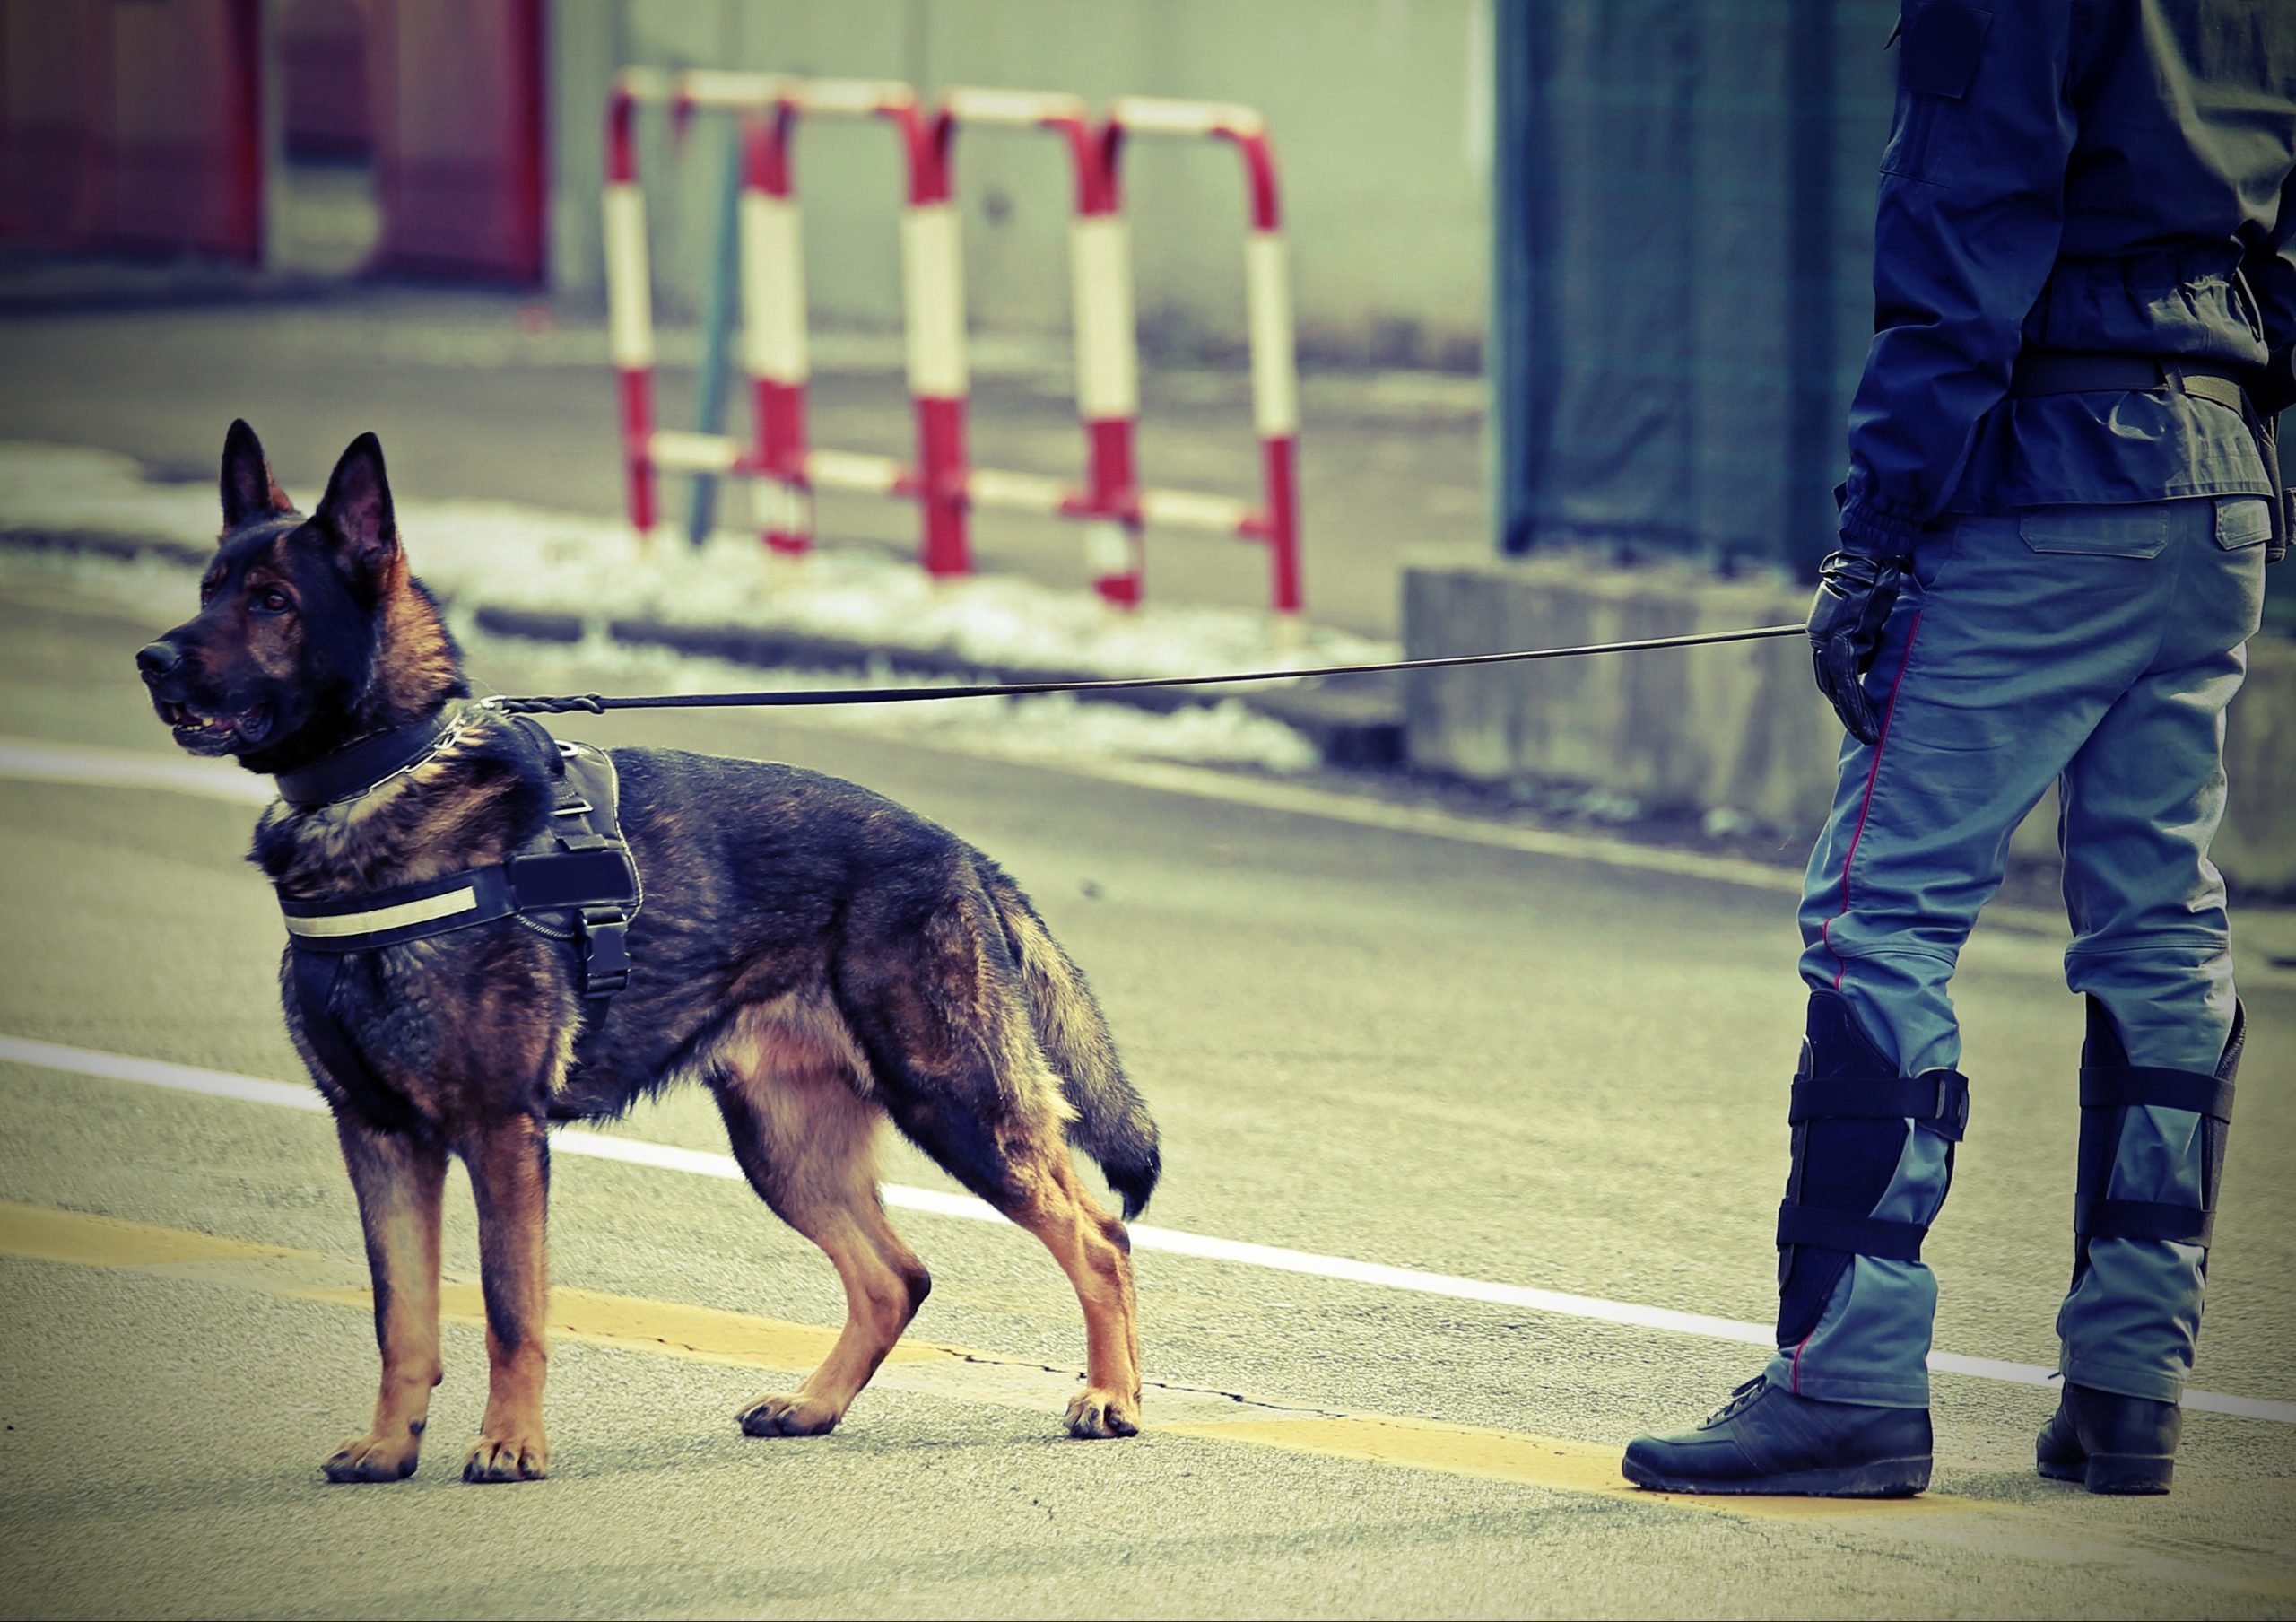 police dog and a policeman with vintage effect on the street